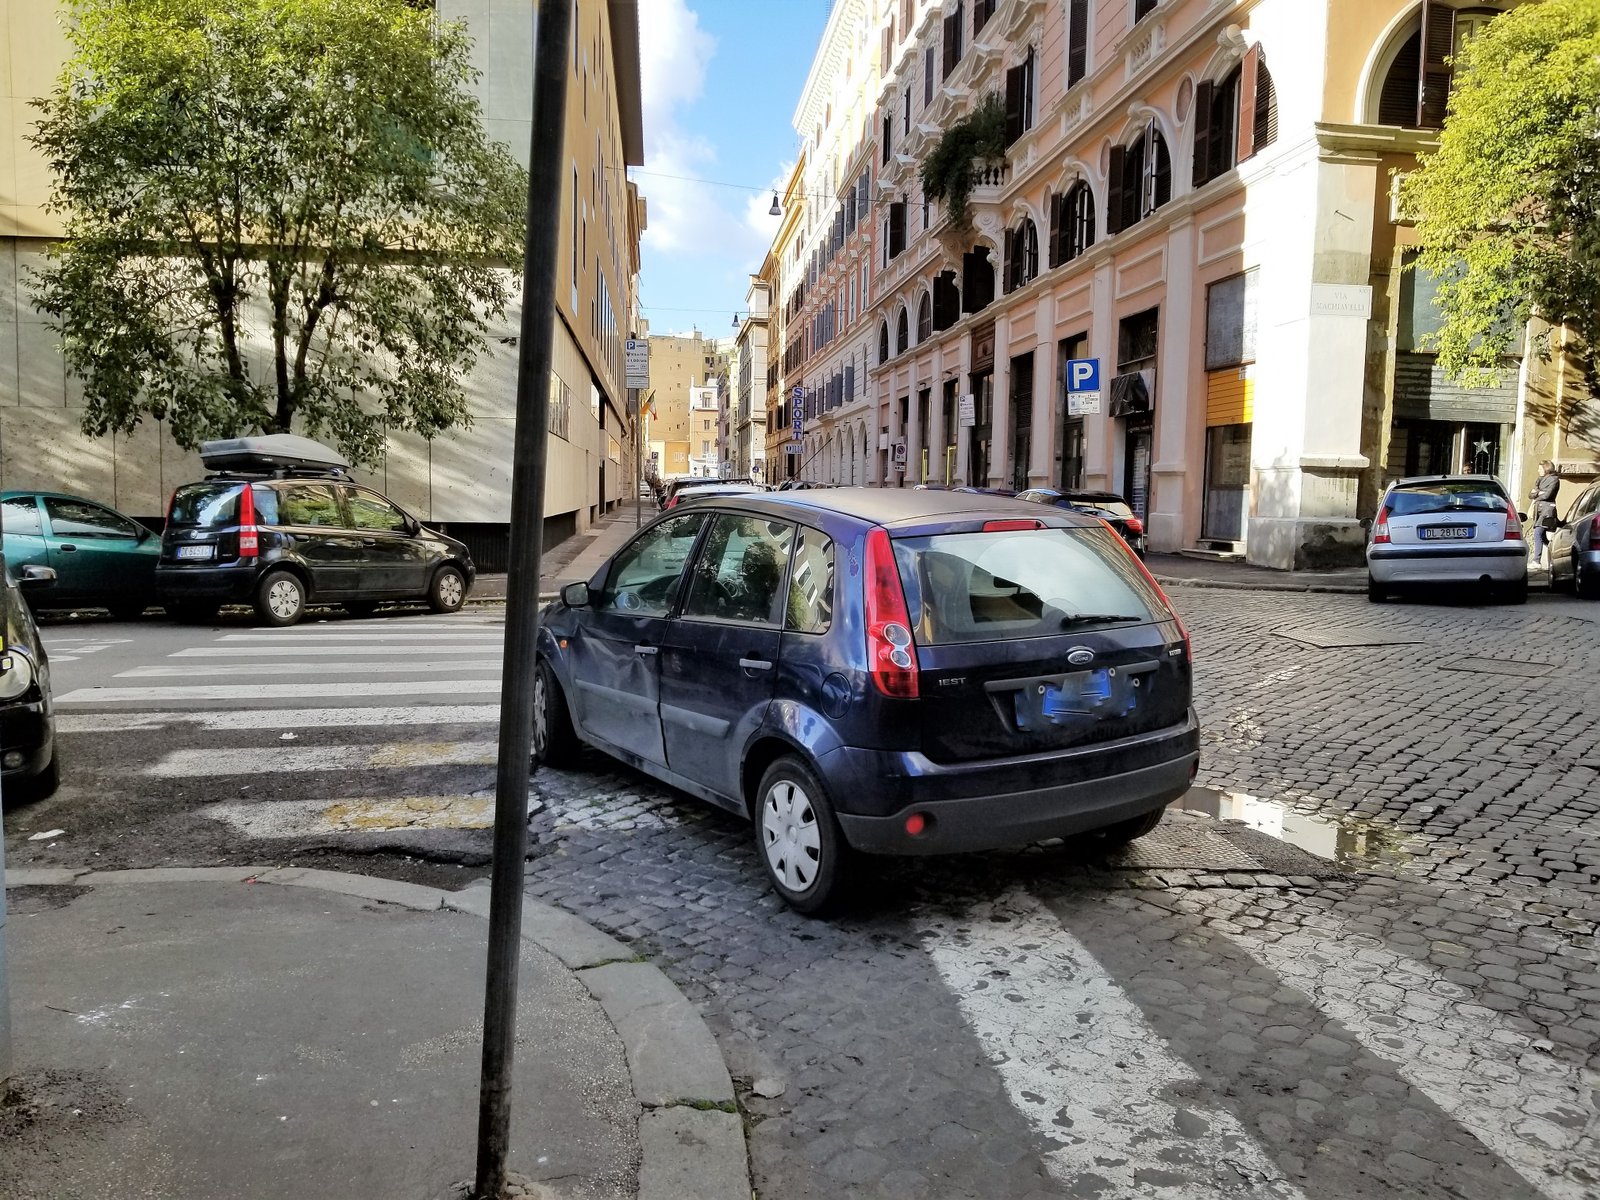 Parking in Rome, Italy. ouritalianjourney.com